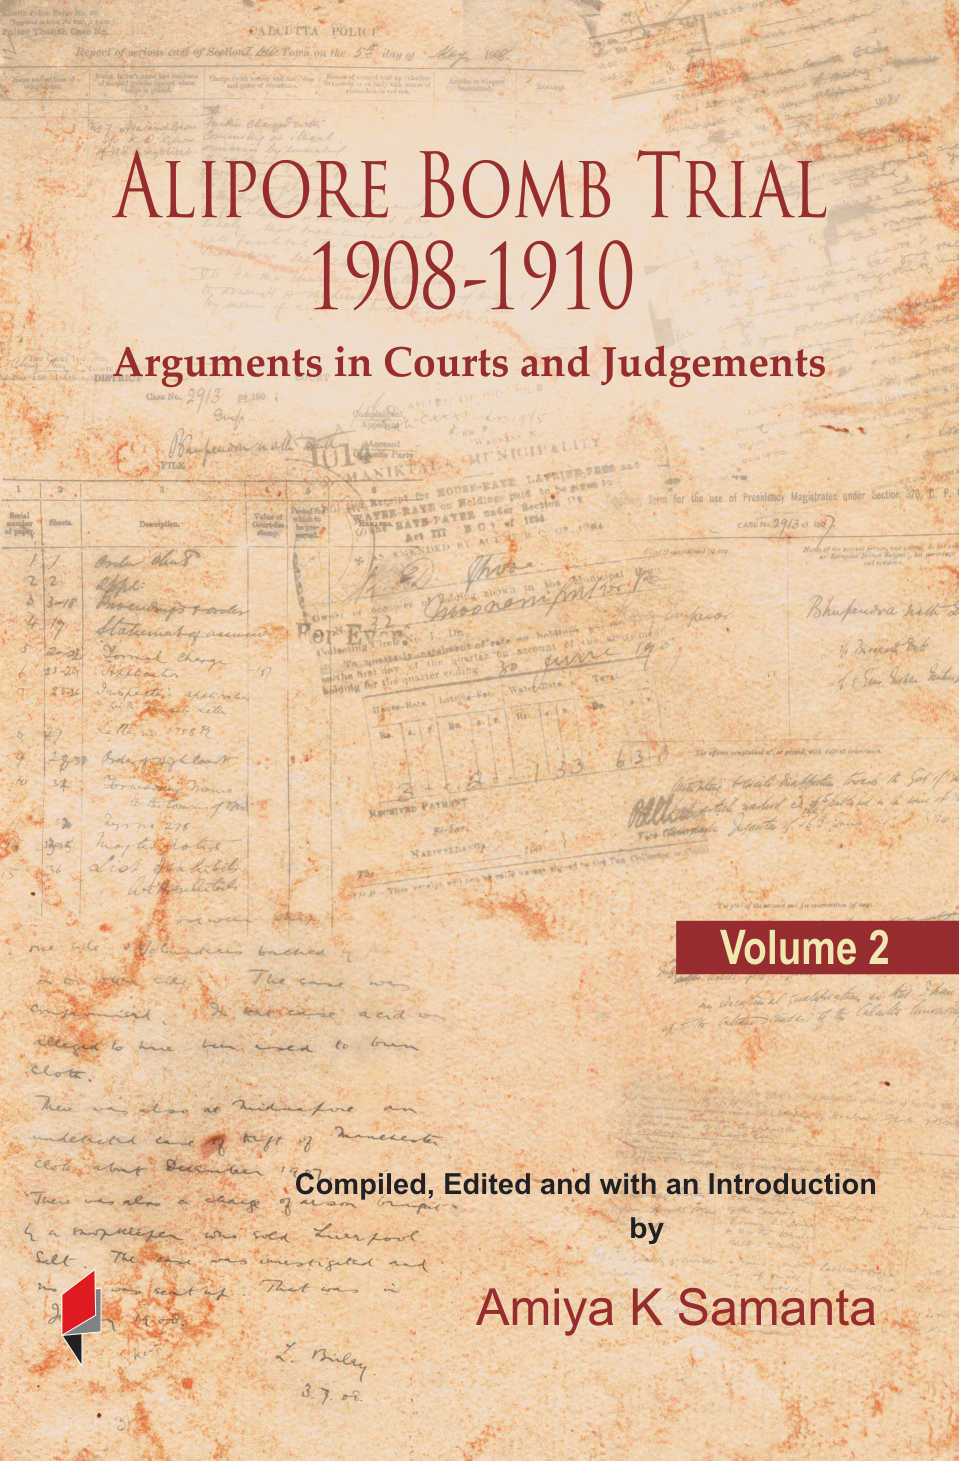 Alipore Bomb Trial, 1908-1910: <span>Arguments in Courts and Judgements, Vol 2 </span>